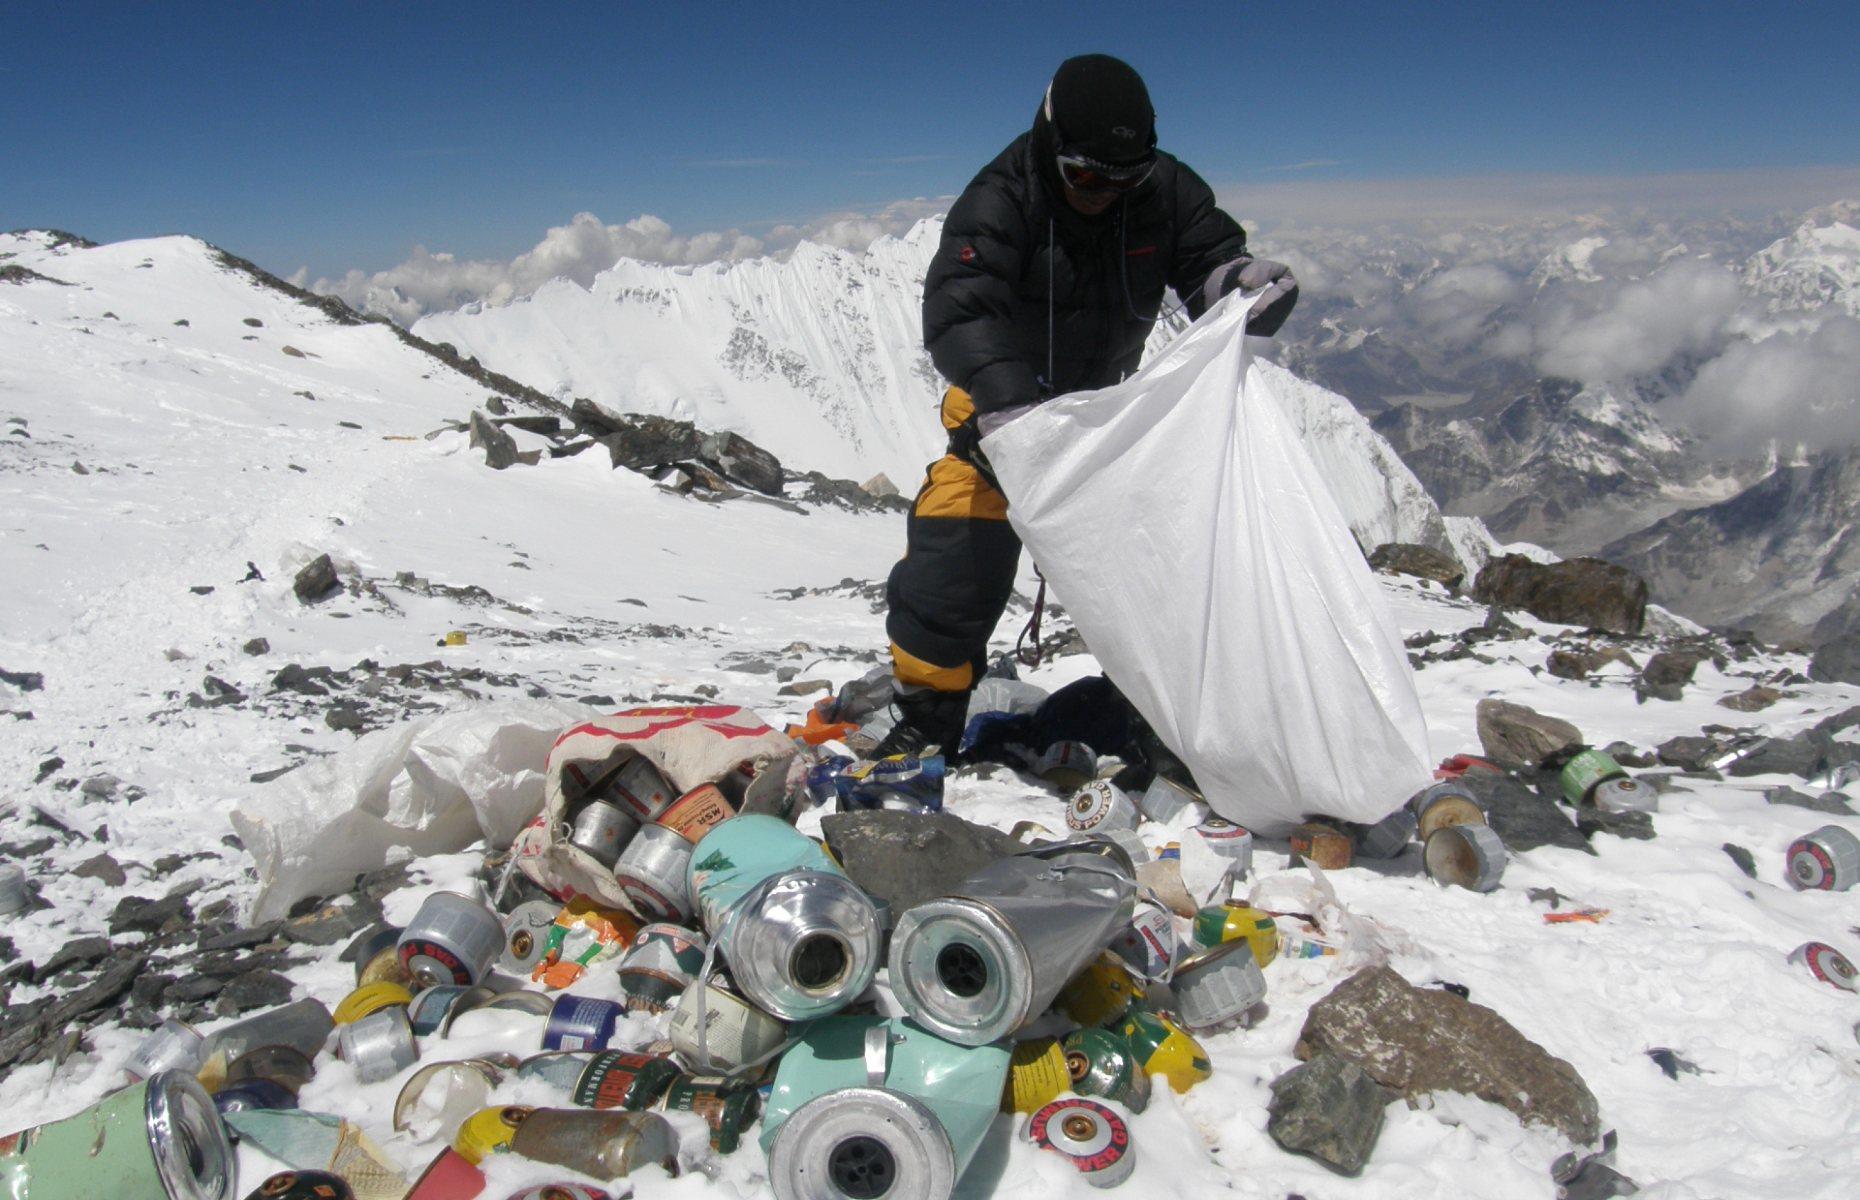 <p>As well as ensuring mountaineering expeditions run smoothly, Sherpas clear up trash left on the mountain afterwards – which can be a huge undertaking. In Tibetan, Everest is known as Chomolungma meaning goddess mother of the world, and the summit is believed to house the Buddhist goddess Miyolangsangma. In recent years, Sherpas have <a href="https://www.bbc.co.uk/news/world-asia-48464030">voiced concerns about the sheer number of climbers that scale Everest each year</a>, which has increased the demands heaped on them.</p>  <p><a href="https://www.loveexploring.com/news/108161/every-step-counts-nimsdai-nims-purja-on-being-the-first-to-conquer-k2"><strong>Read our interview with Nims Purja, who conquered K2 in winter</strong></a></p>